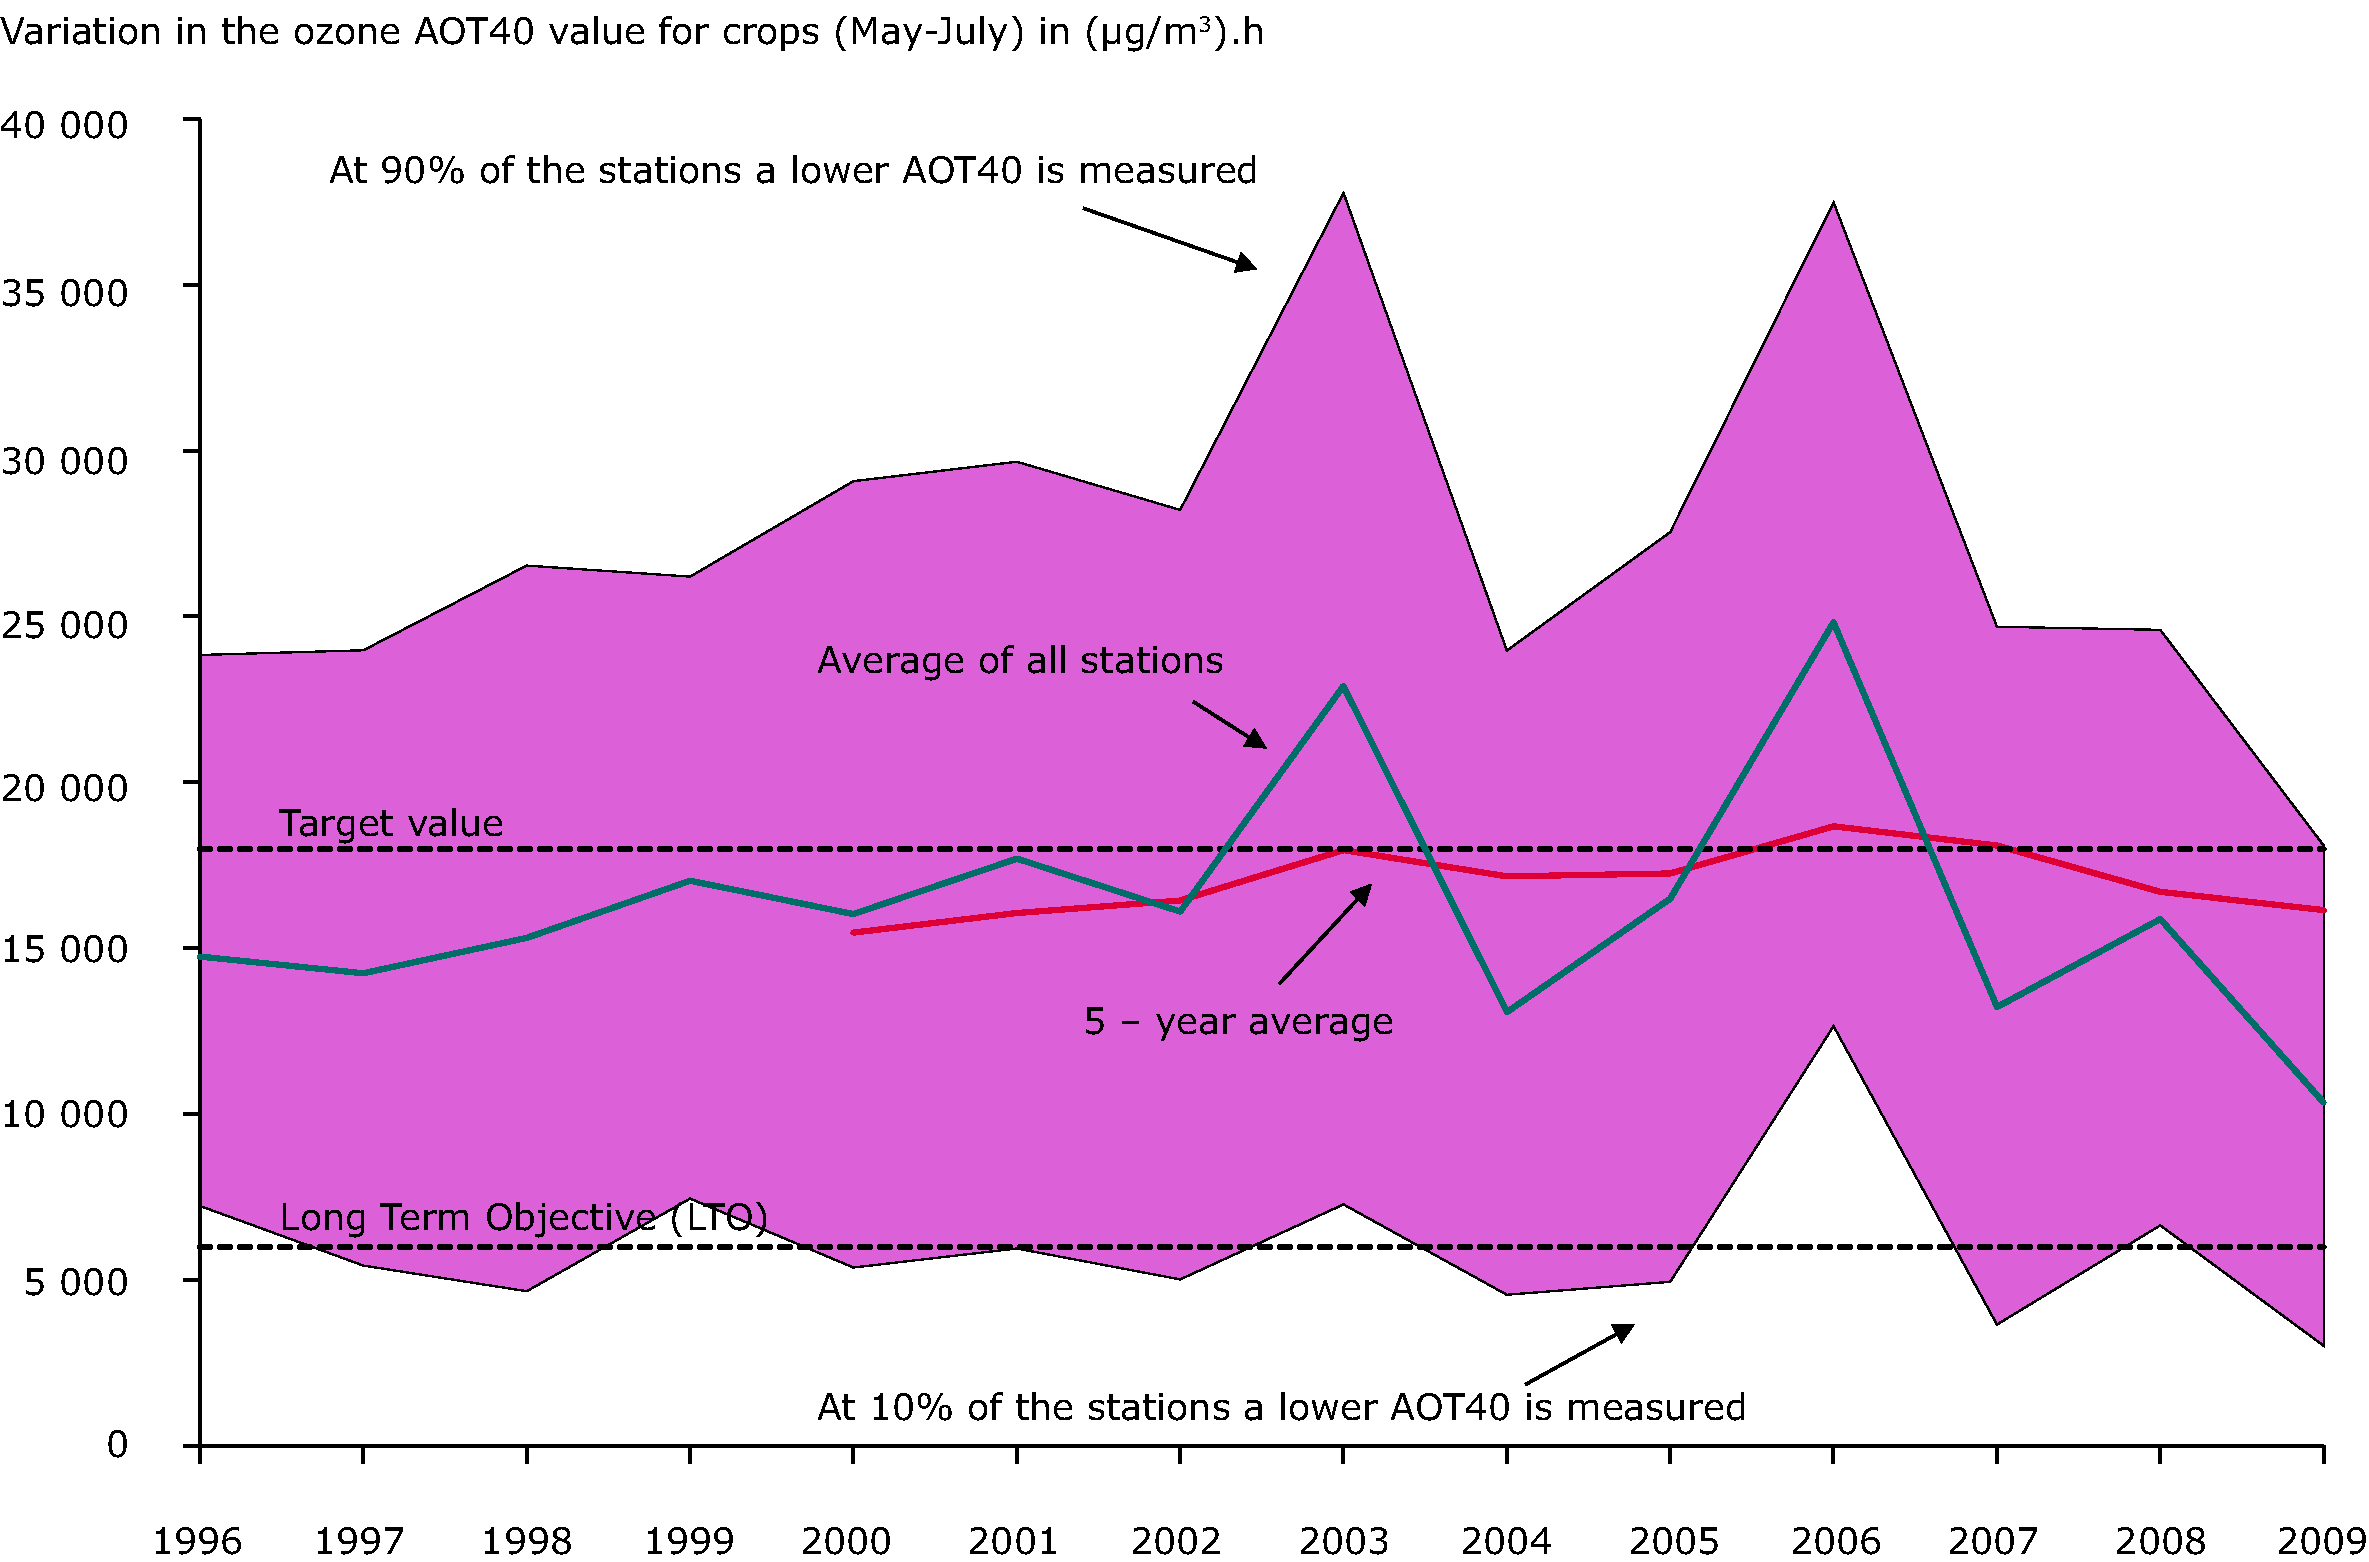 Annual variation in the ozone AOT40 value for crops (May-July) in (μg/m³).h, 1996-2009